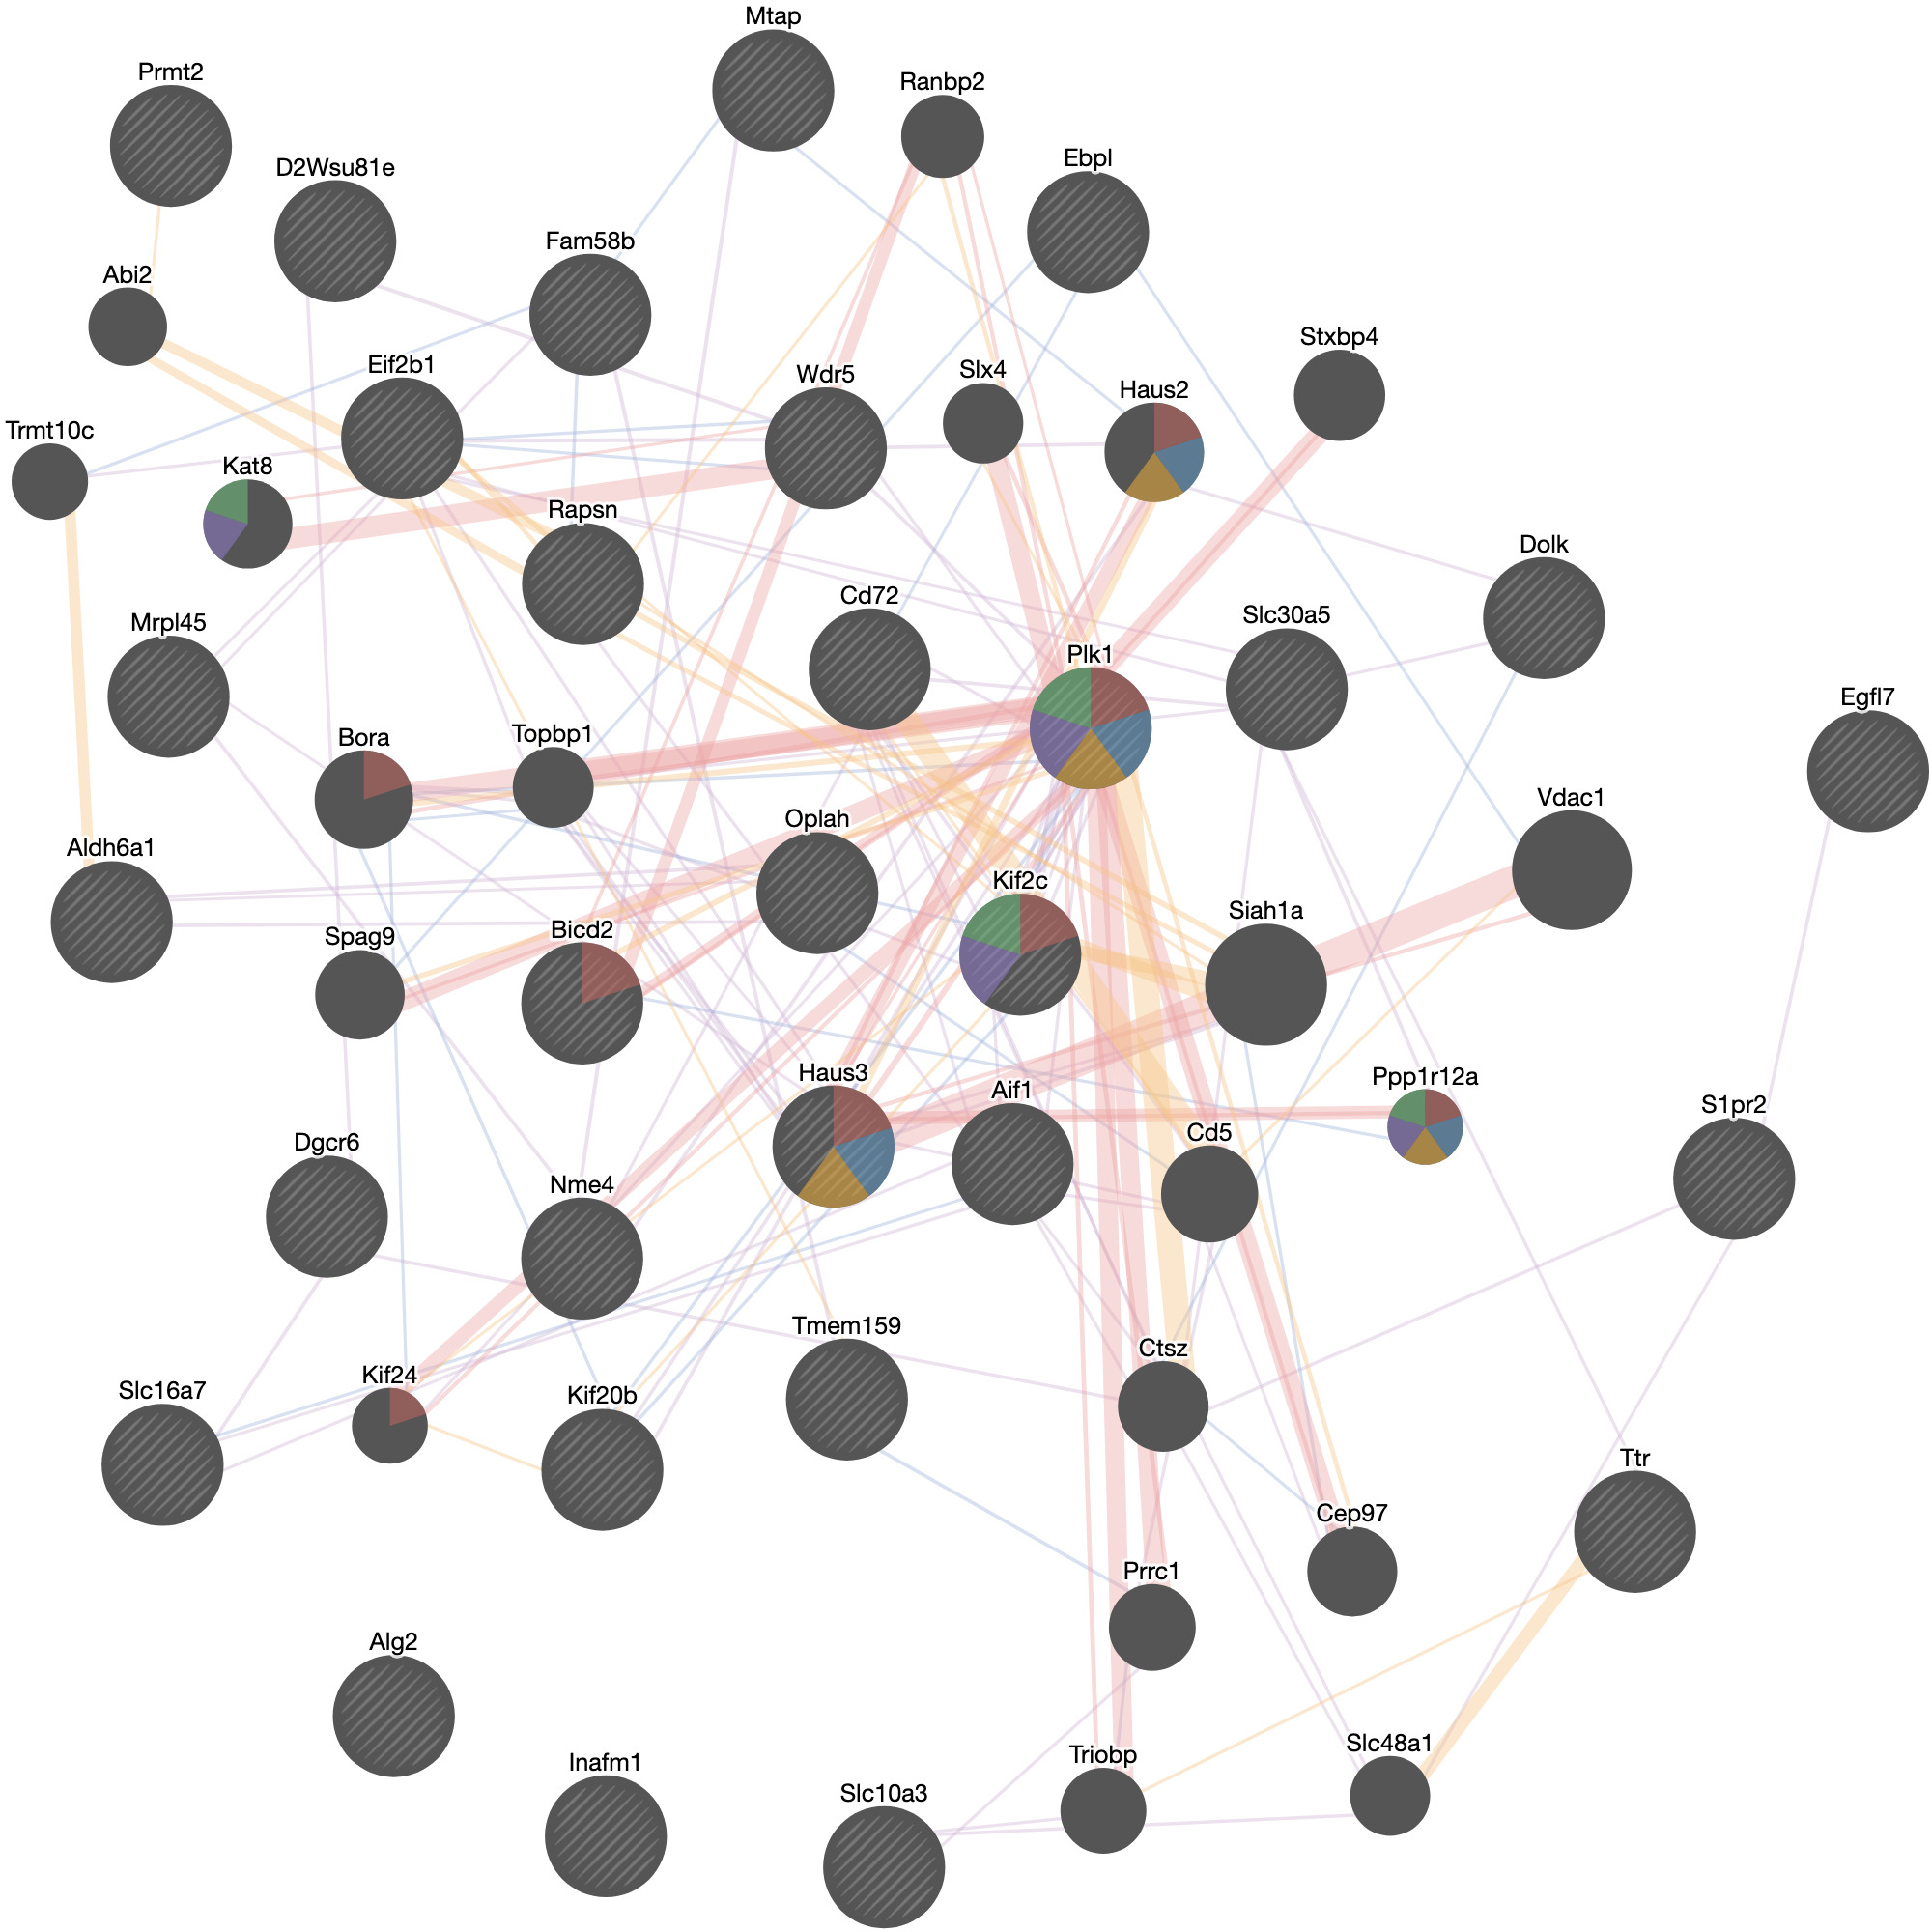 Figure 6. Iba1(Aif1) network analyses showing 50 total related genes with similar function in color 